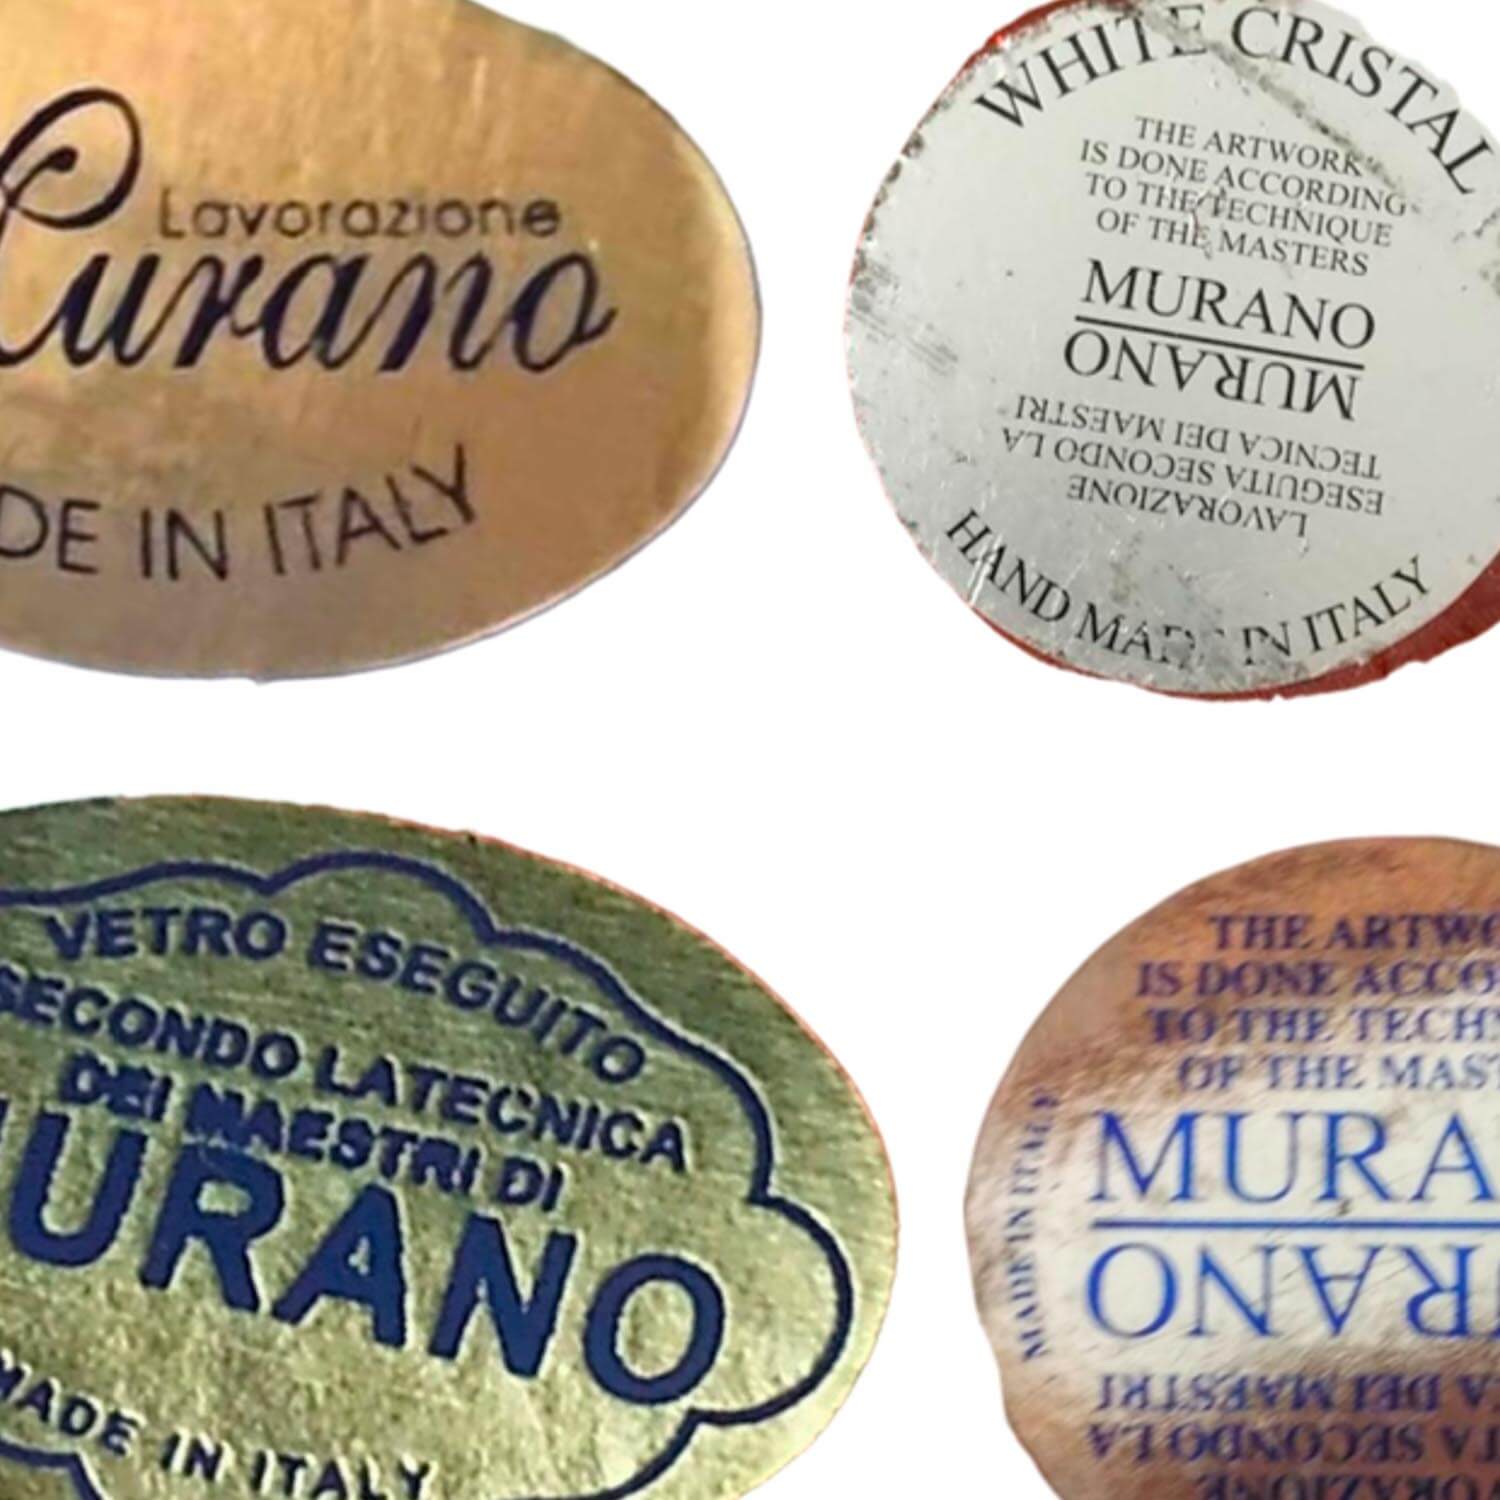 Murano Labels Crafted to Mislead